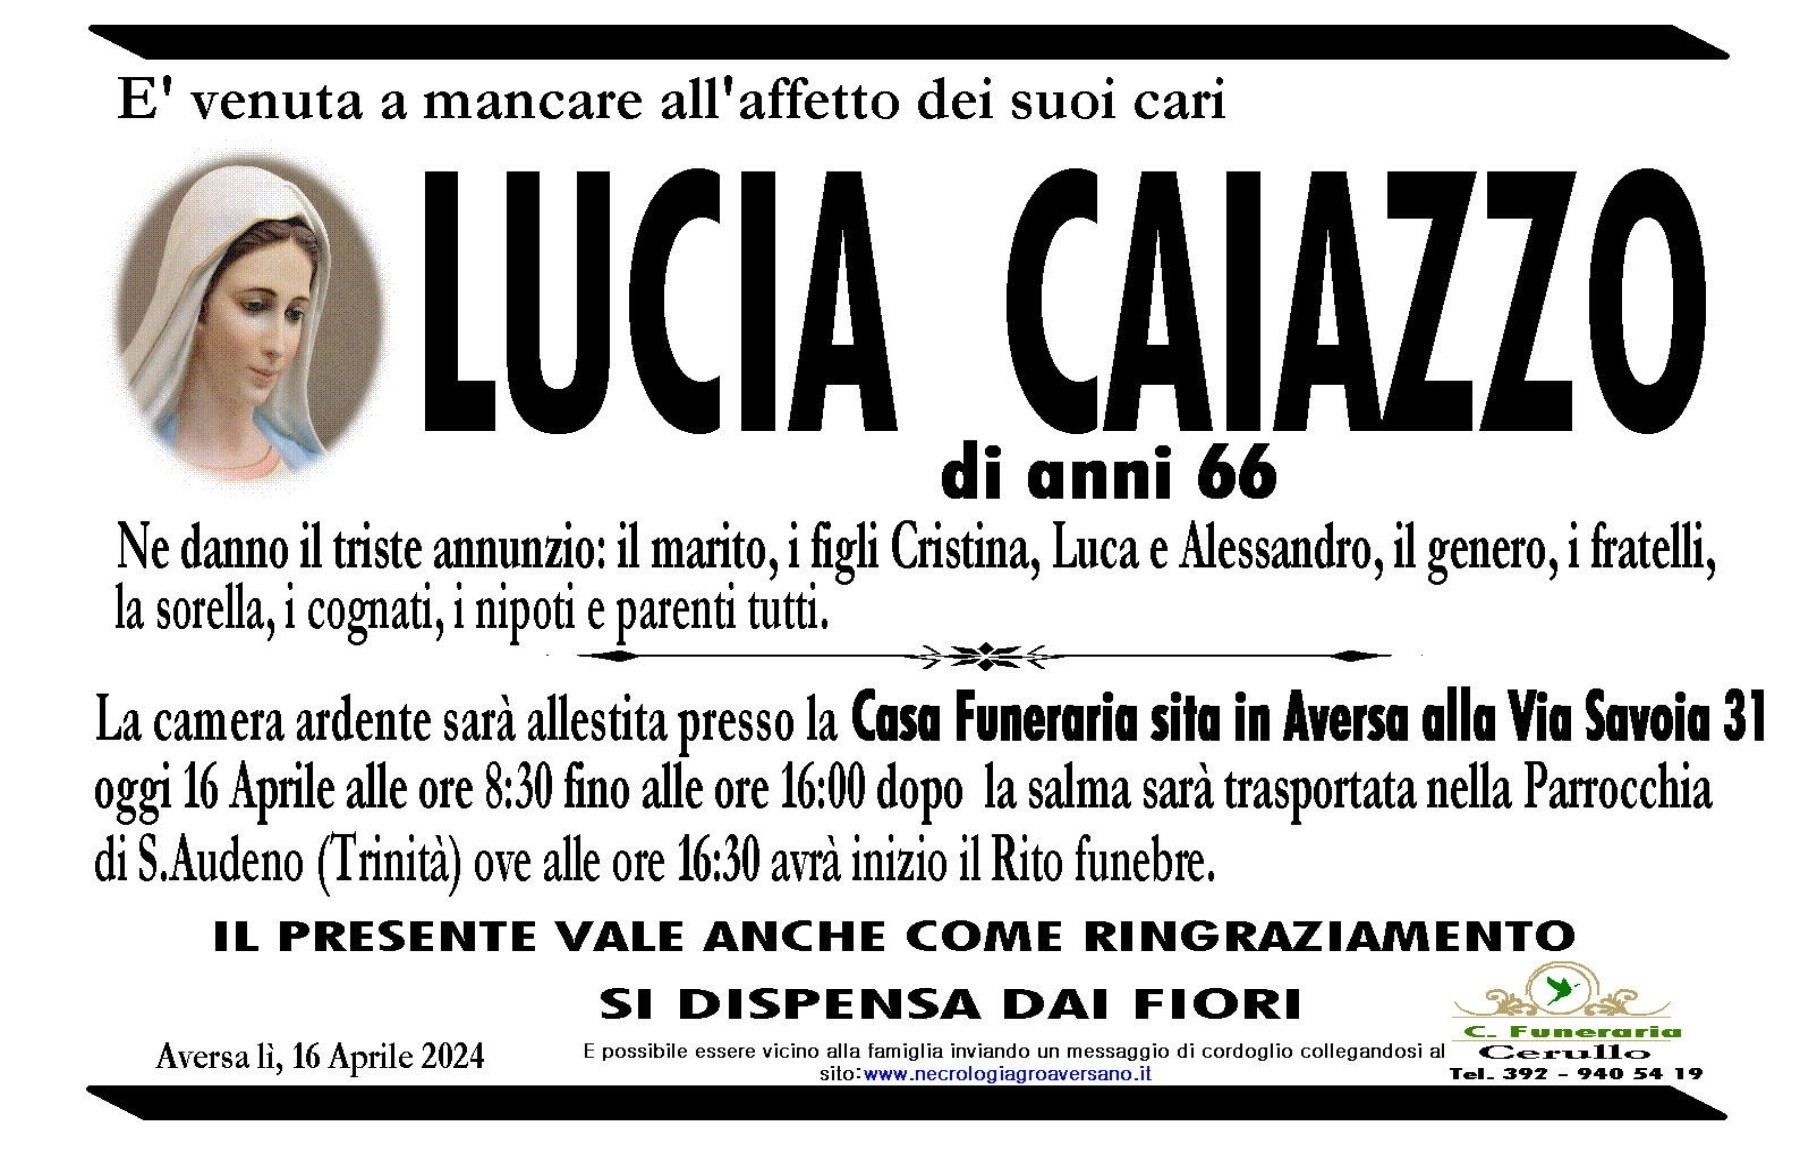 Lucia Caiazzo